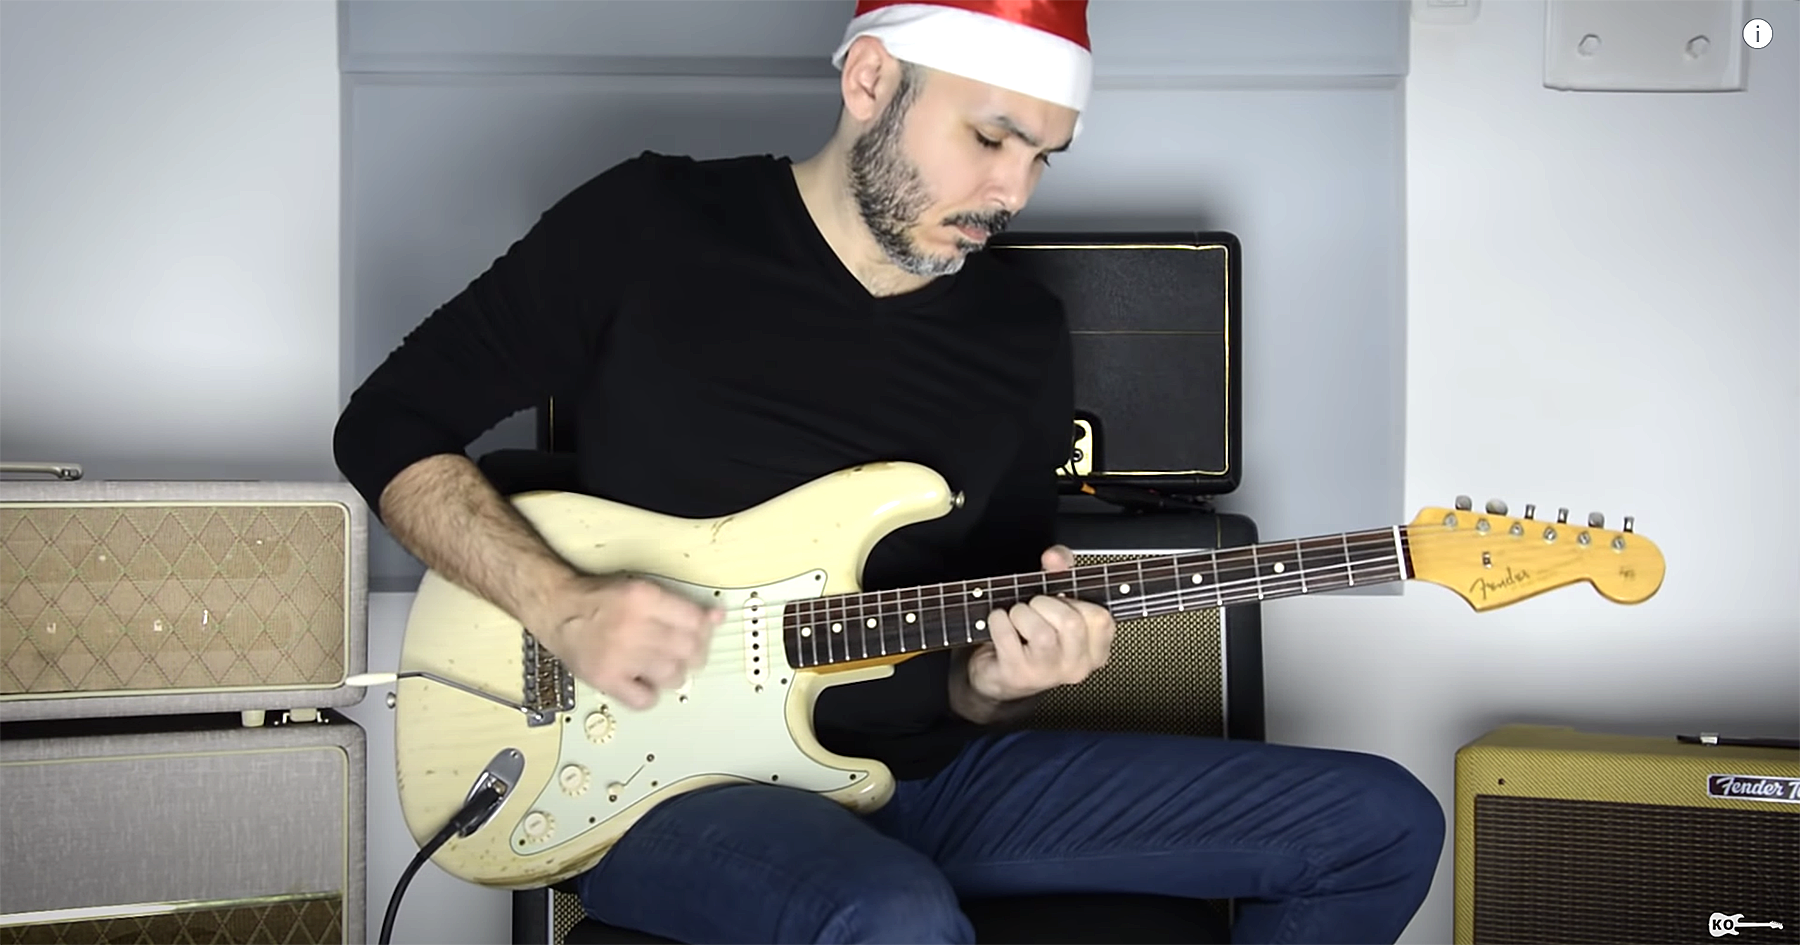 “All I Want For Christmas Is You” Mariah Carey Guitar Cover by Kfir Ochaion—Video of the Week 12/14/20